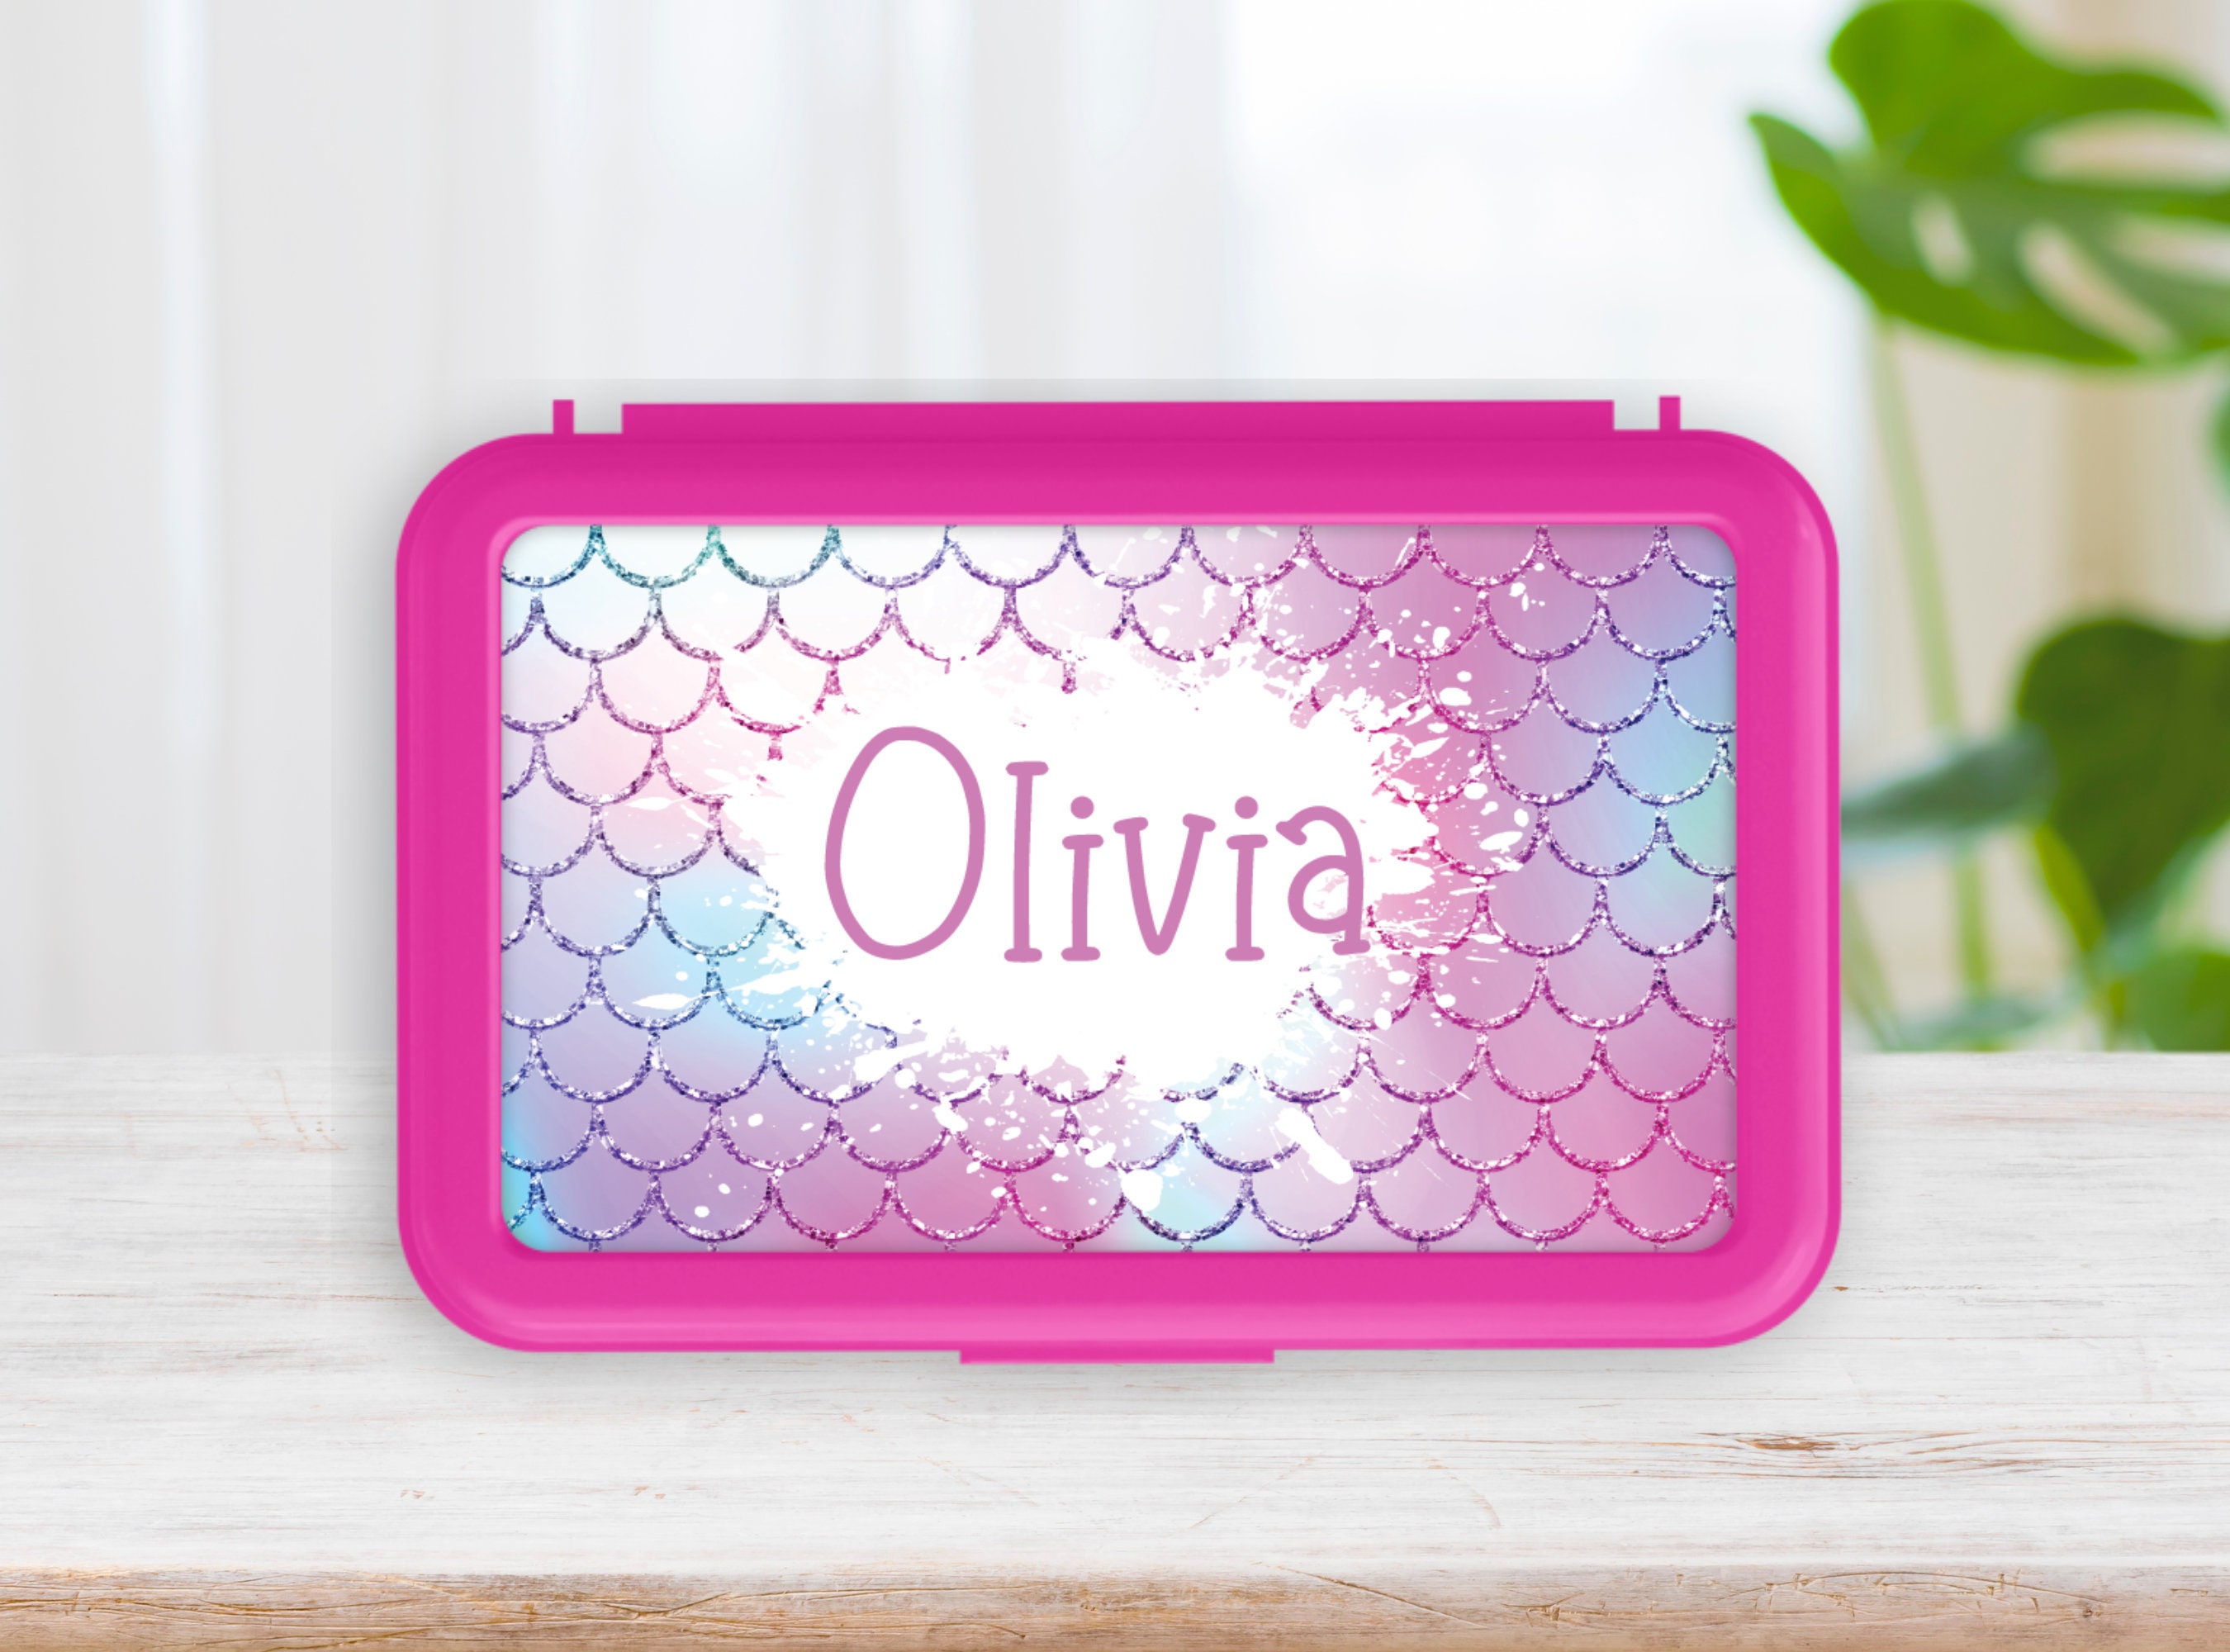 Personalised Kids Wooden Pencil Box